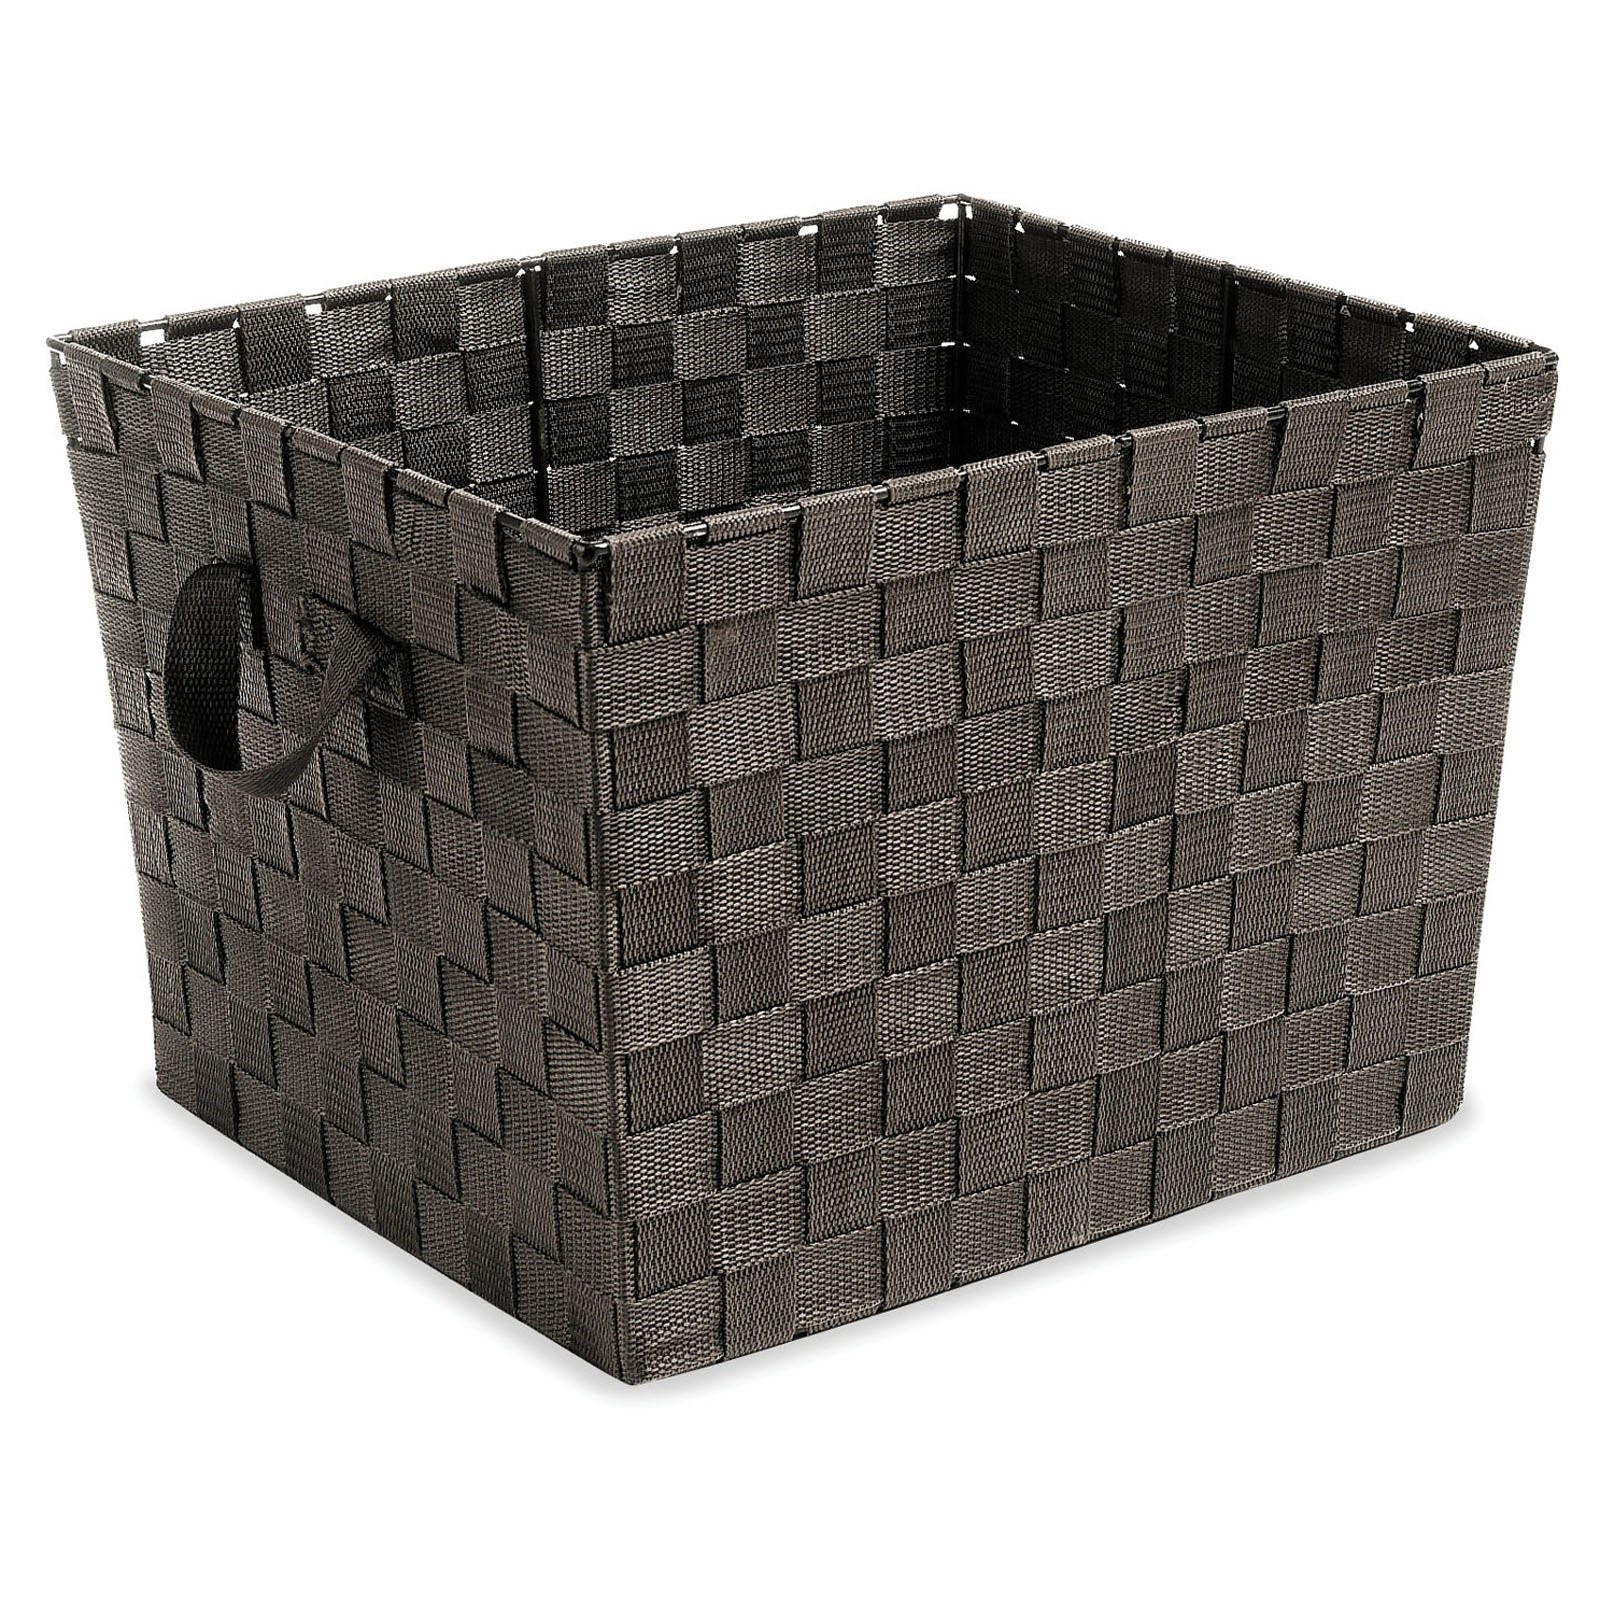 Whitmor Woven Strap Crate Laundry Basket, Espresso - image 2 of 2